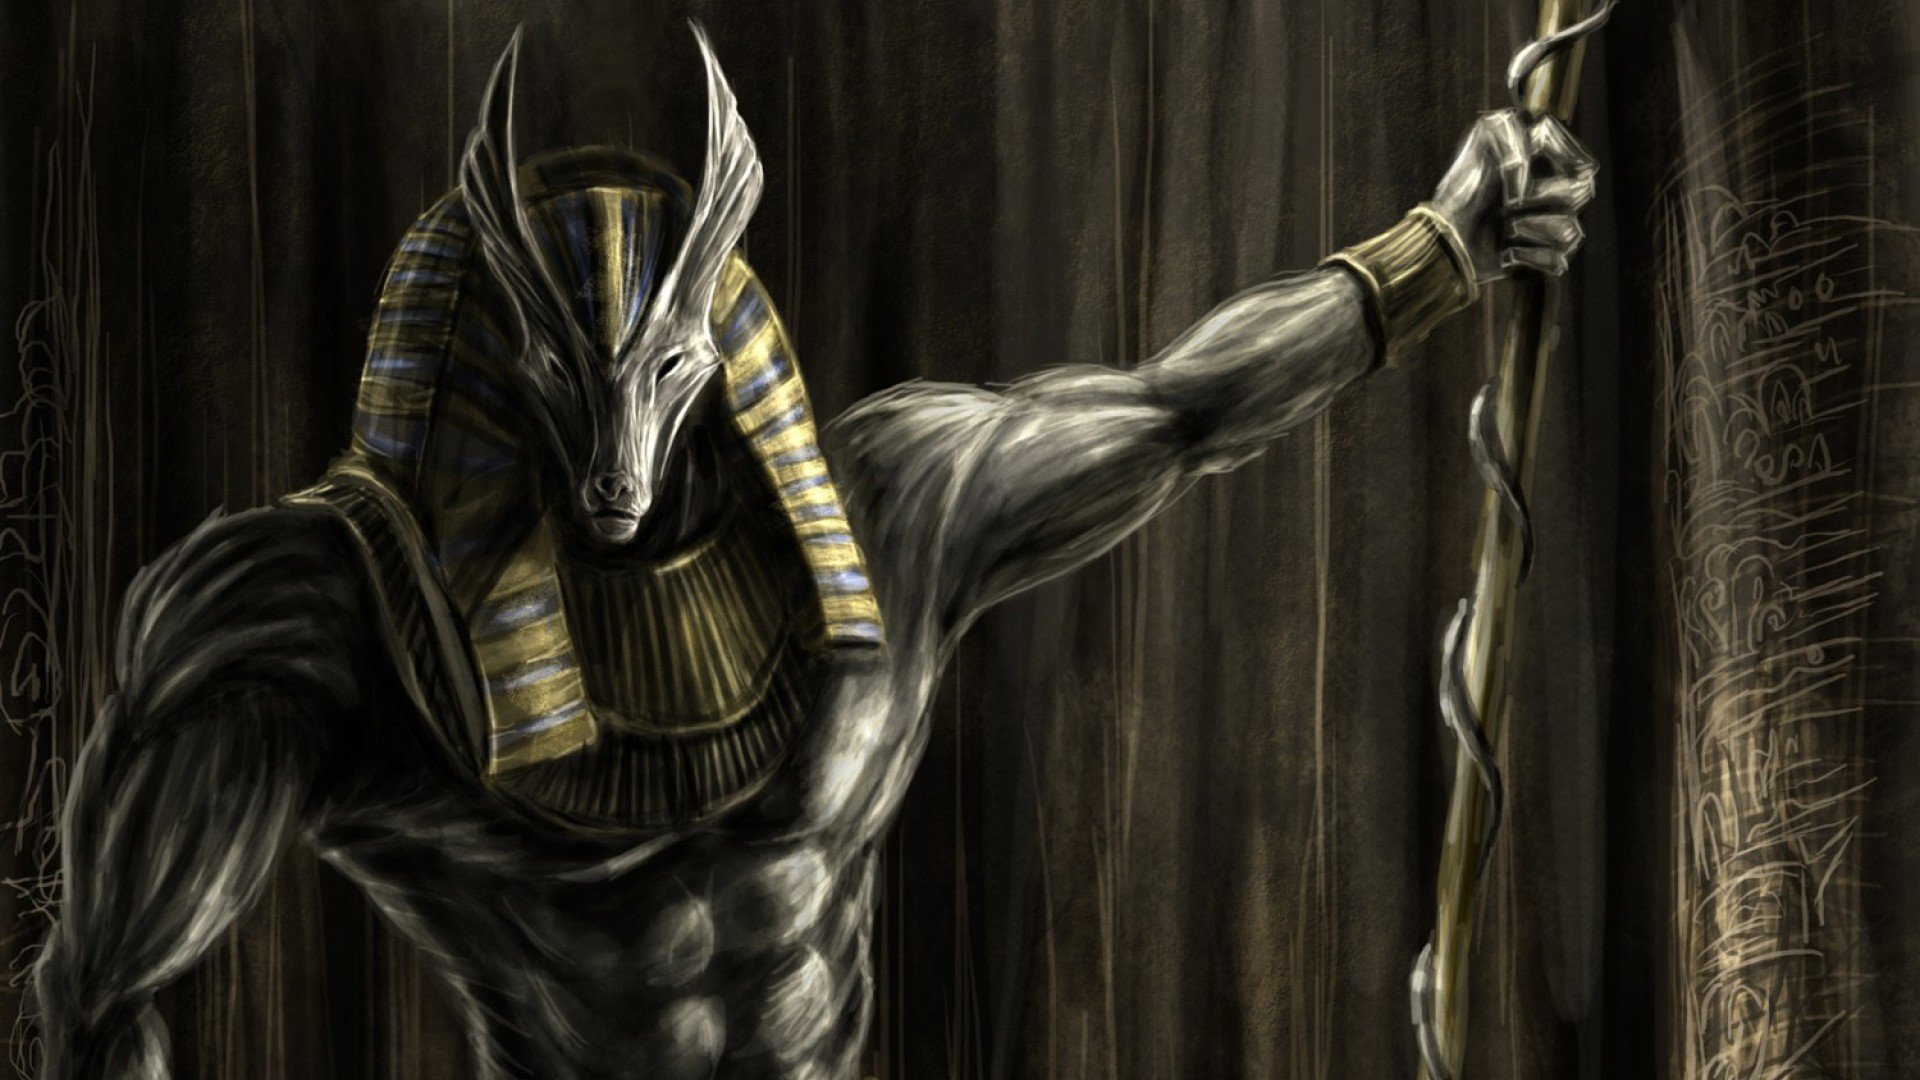 Anubys Egyptian God of the Dead wallpaper 1920x1080 563550